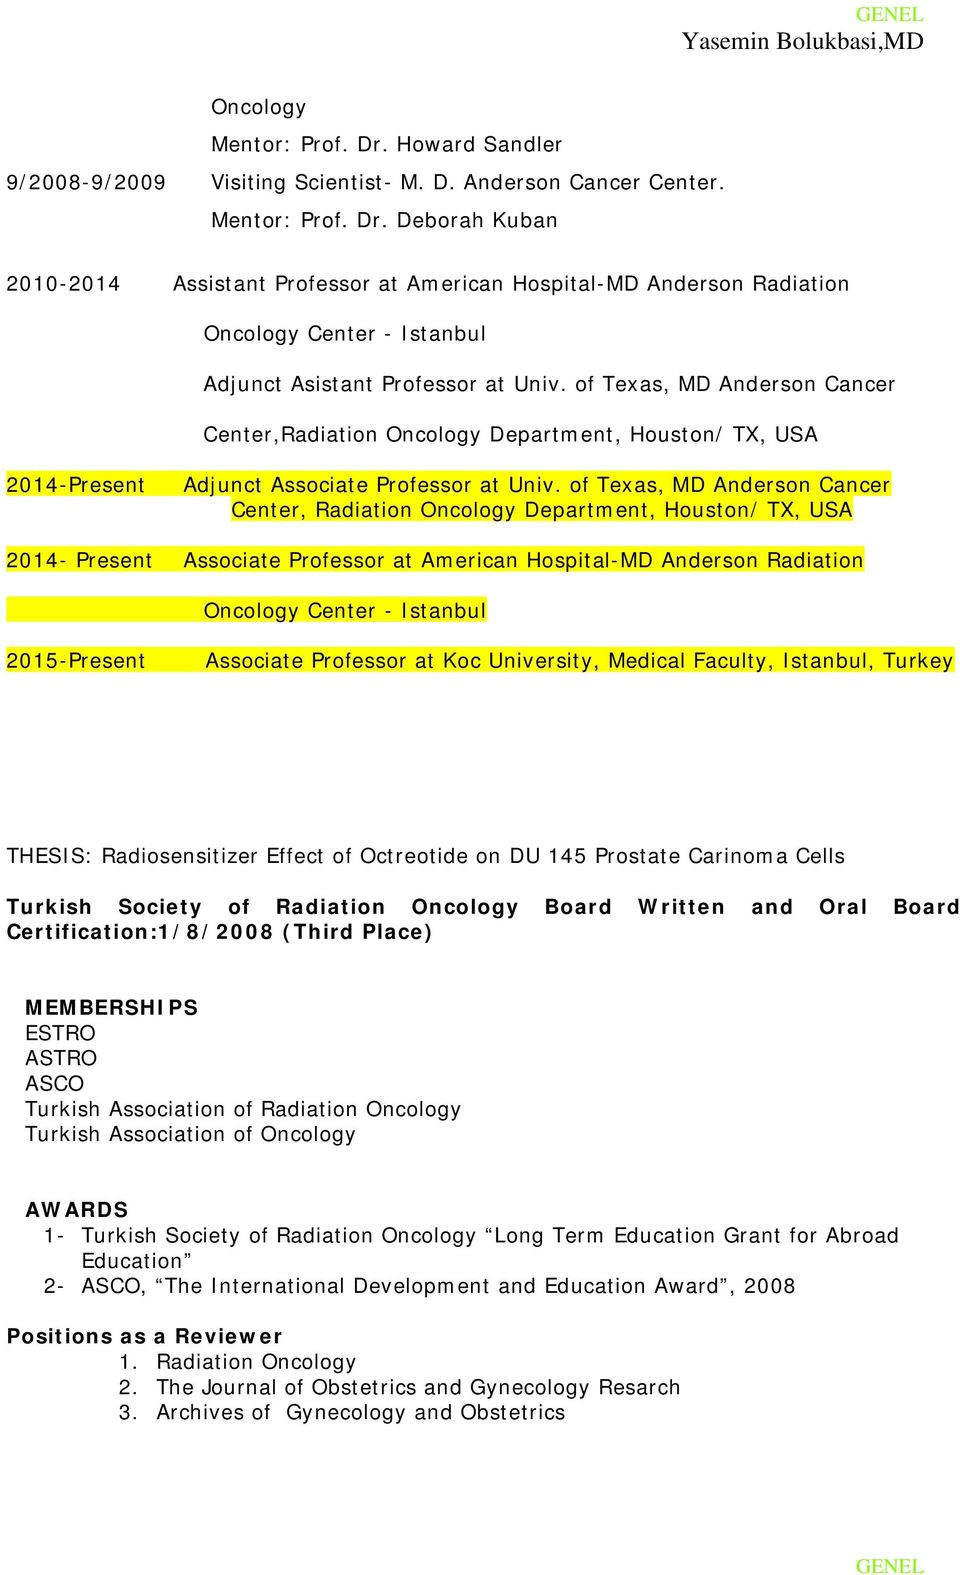 of Texas, MD Anderson Cancer Center, Radiation Oncology Department, Houston/ TX, USA 2014- Present Associate Professor at American Hospital-MD Anderson Radiation Oncology Center - Istanbul